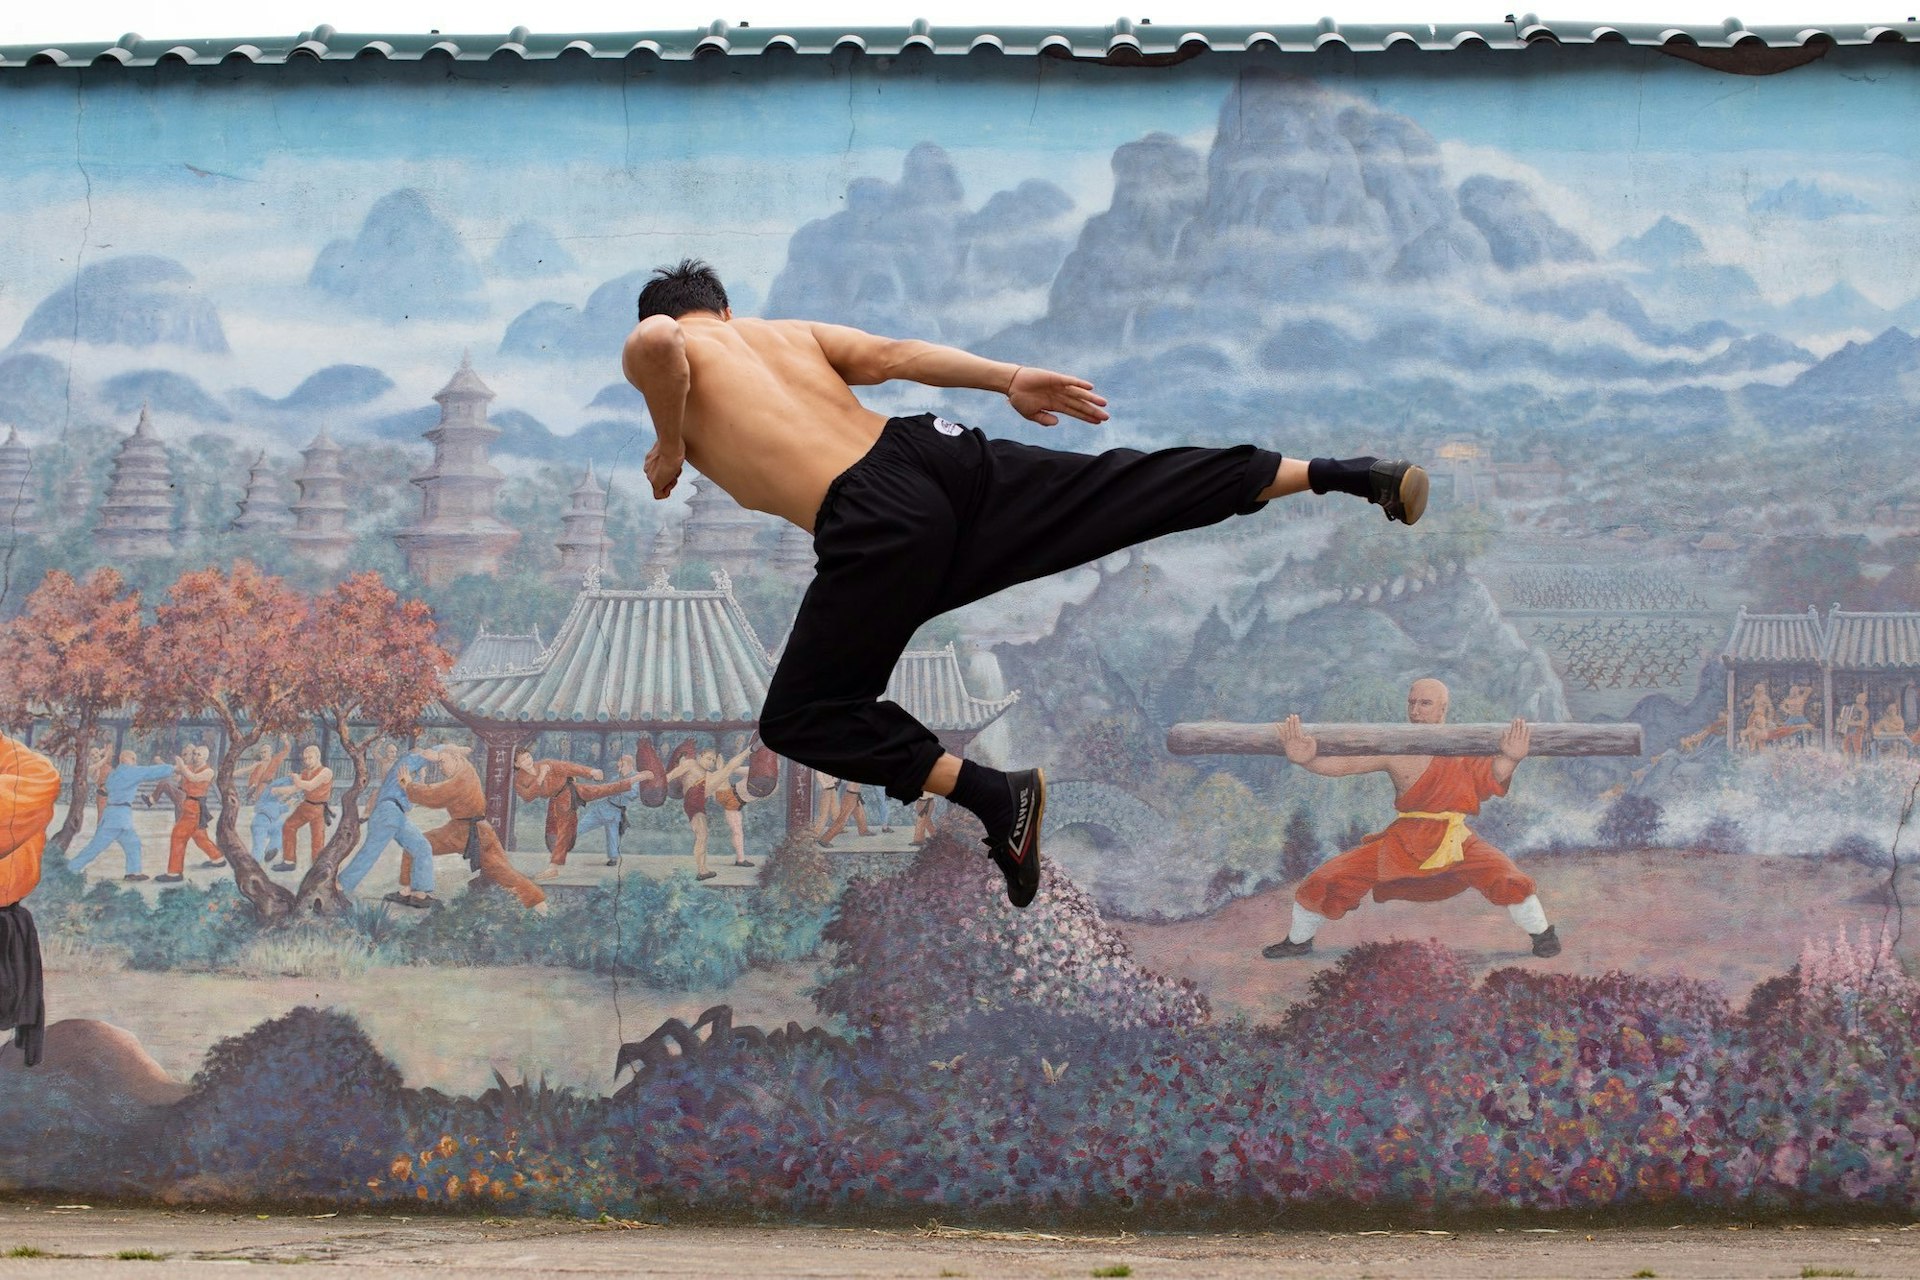 London’s Shaolin warriors are on a quest for self-mastery